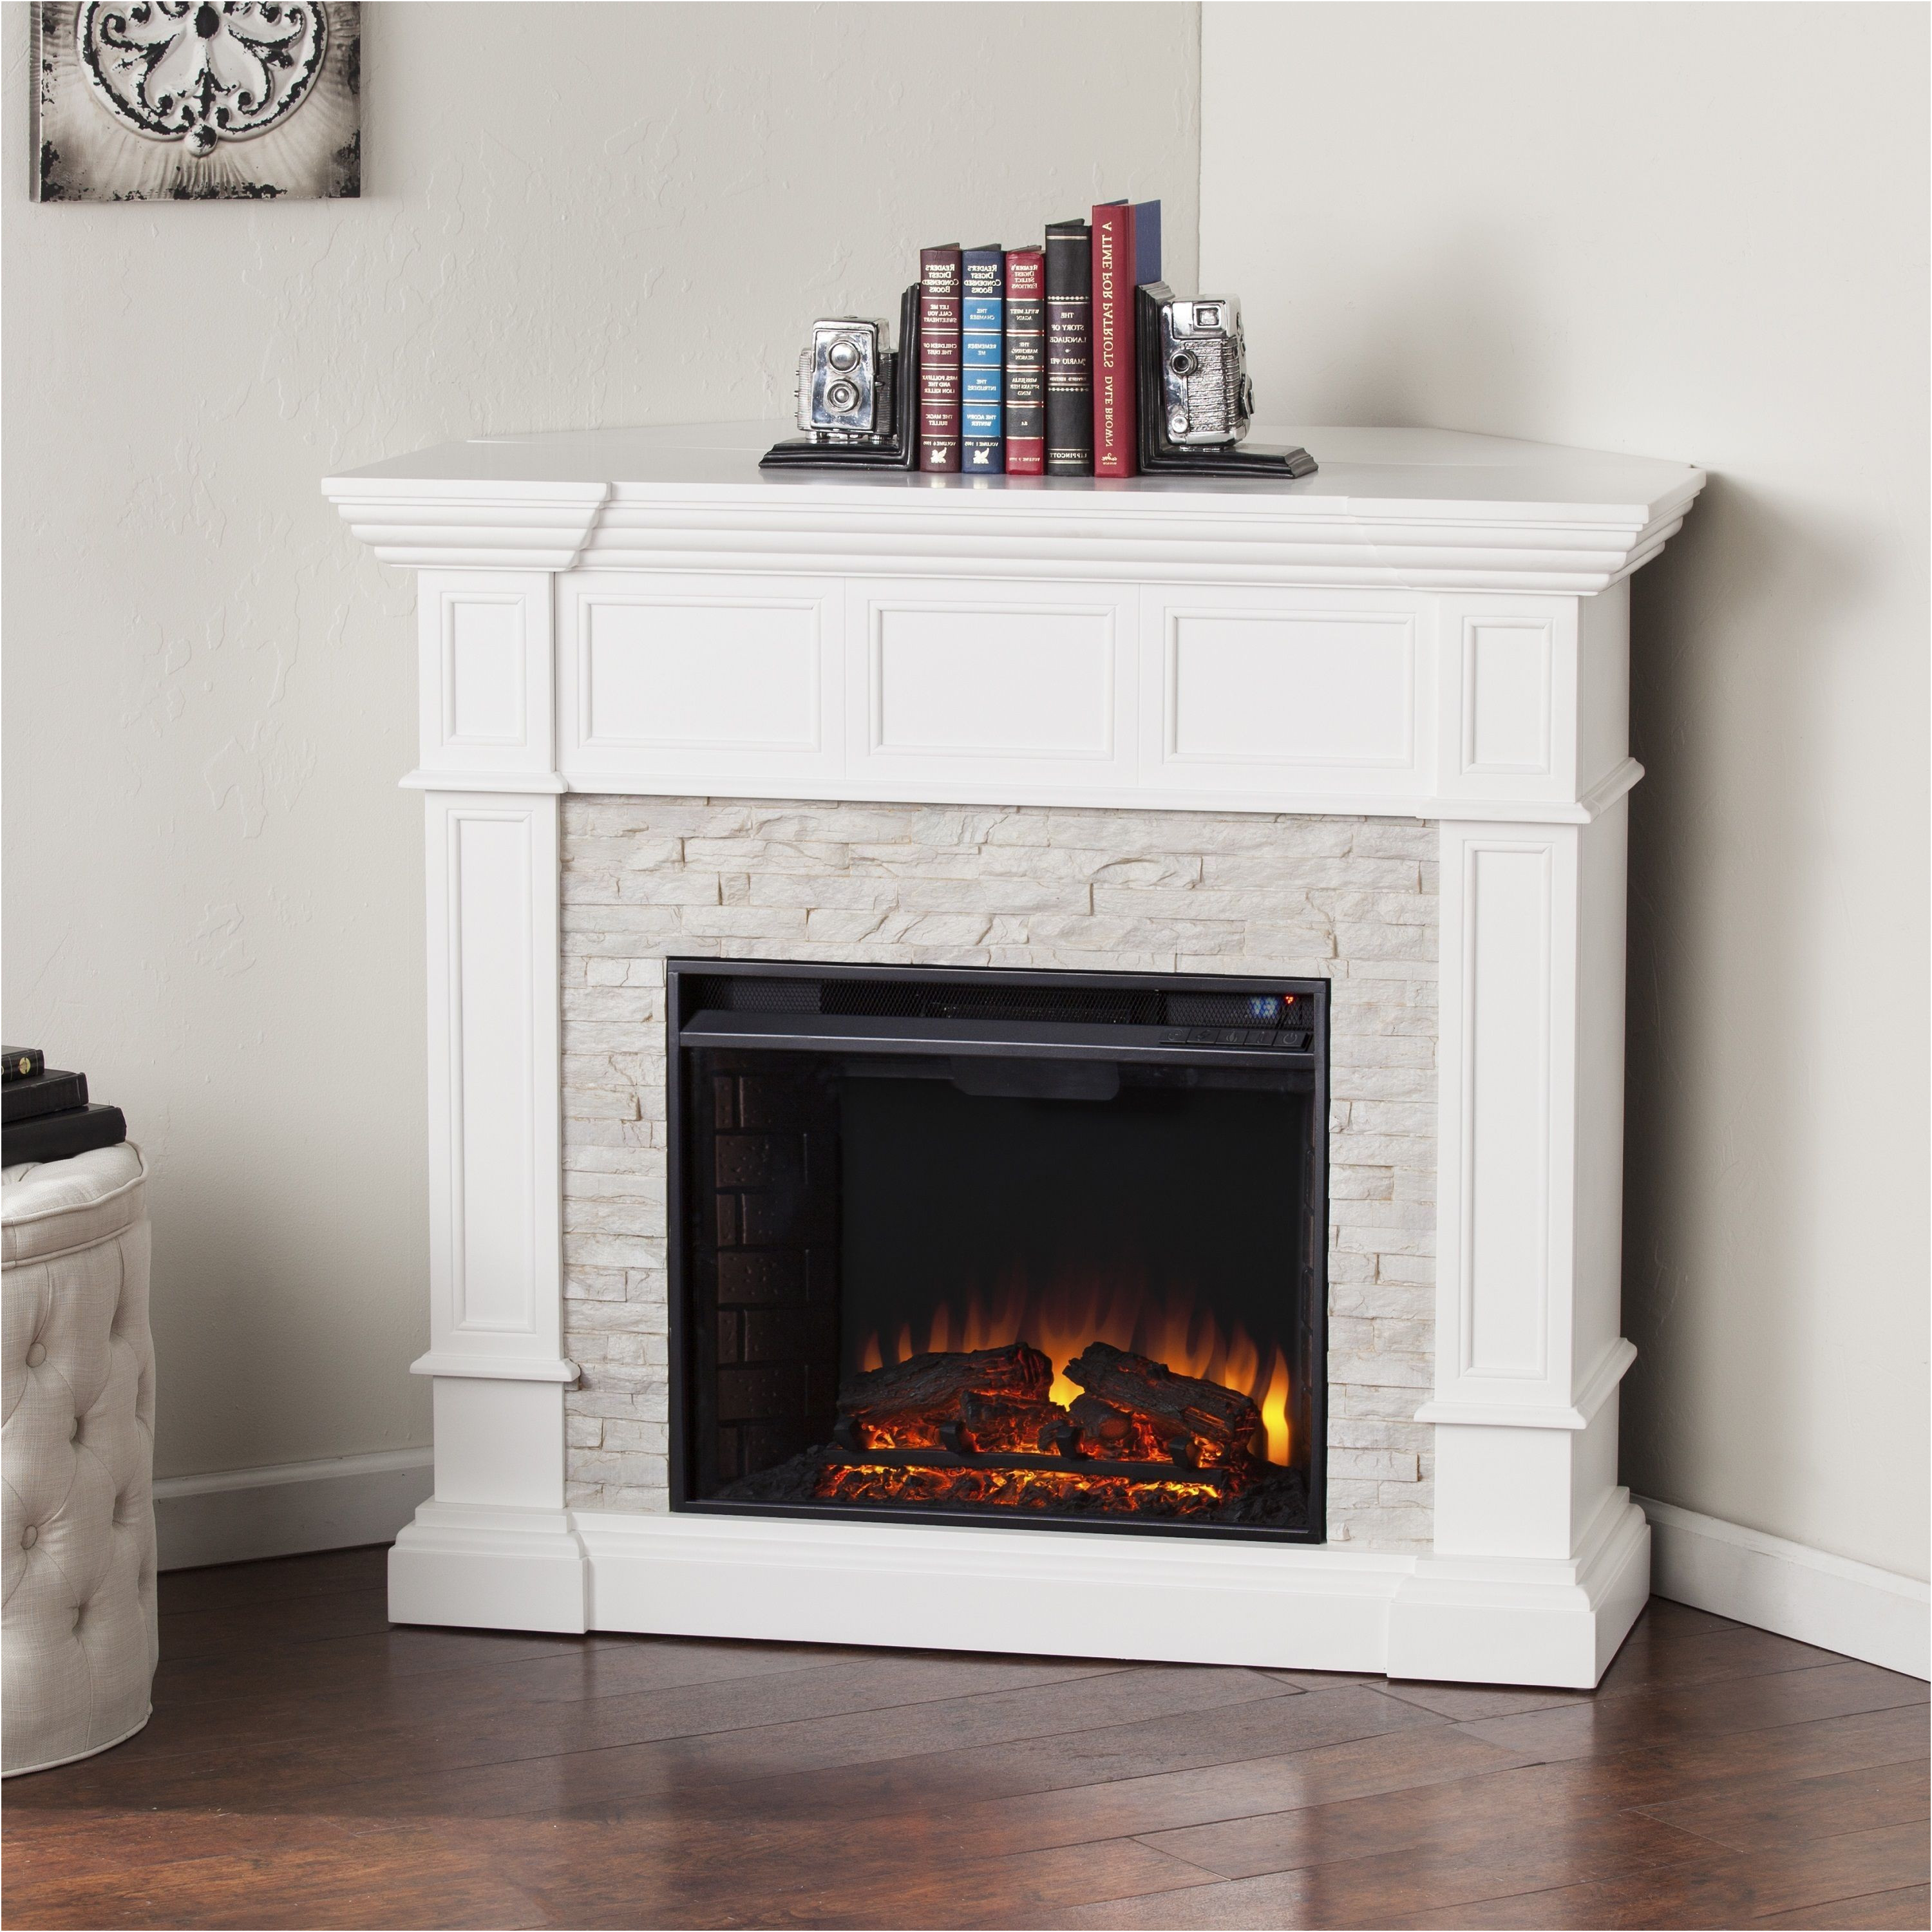 New Ideas for A Corner Fireplace